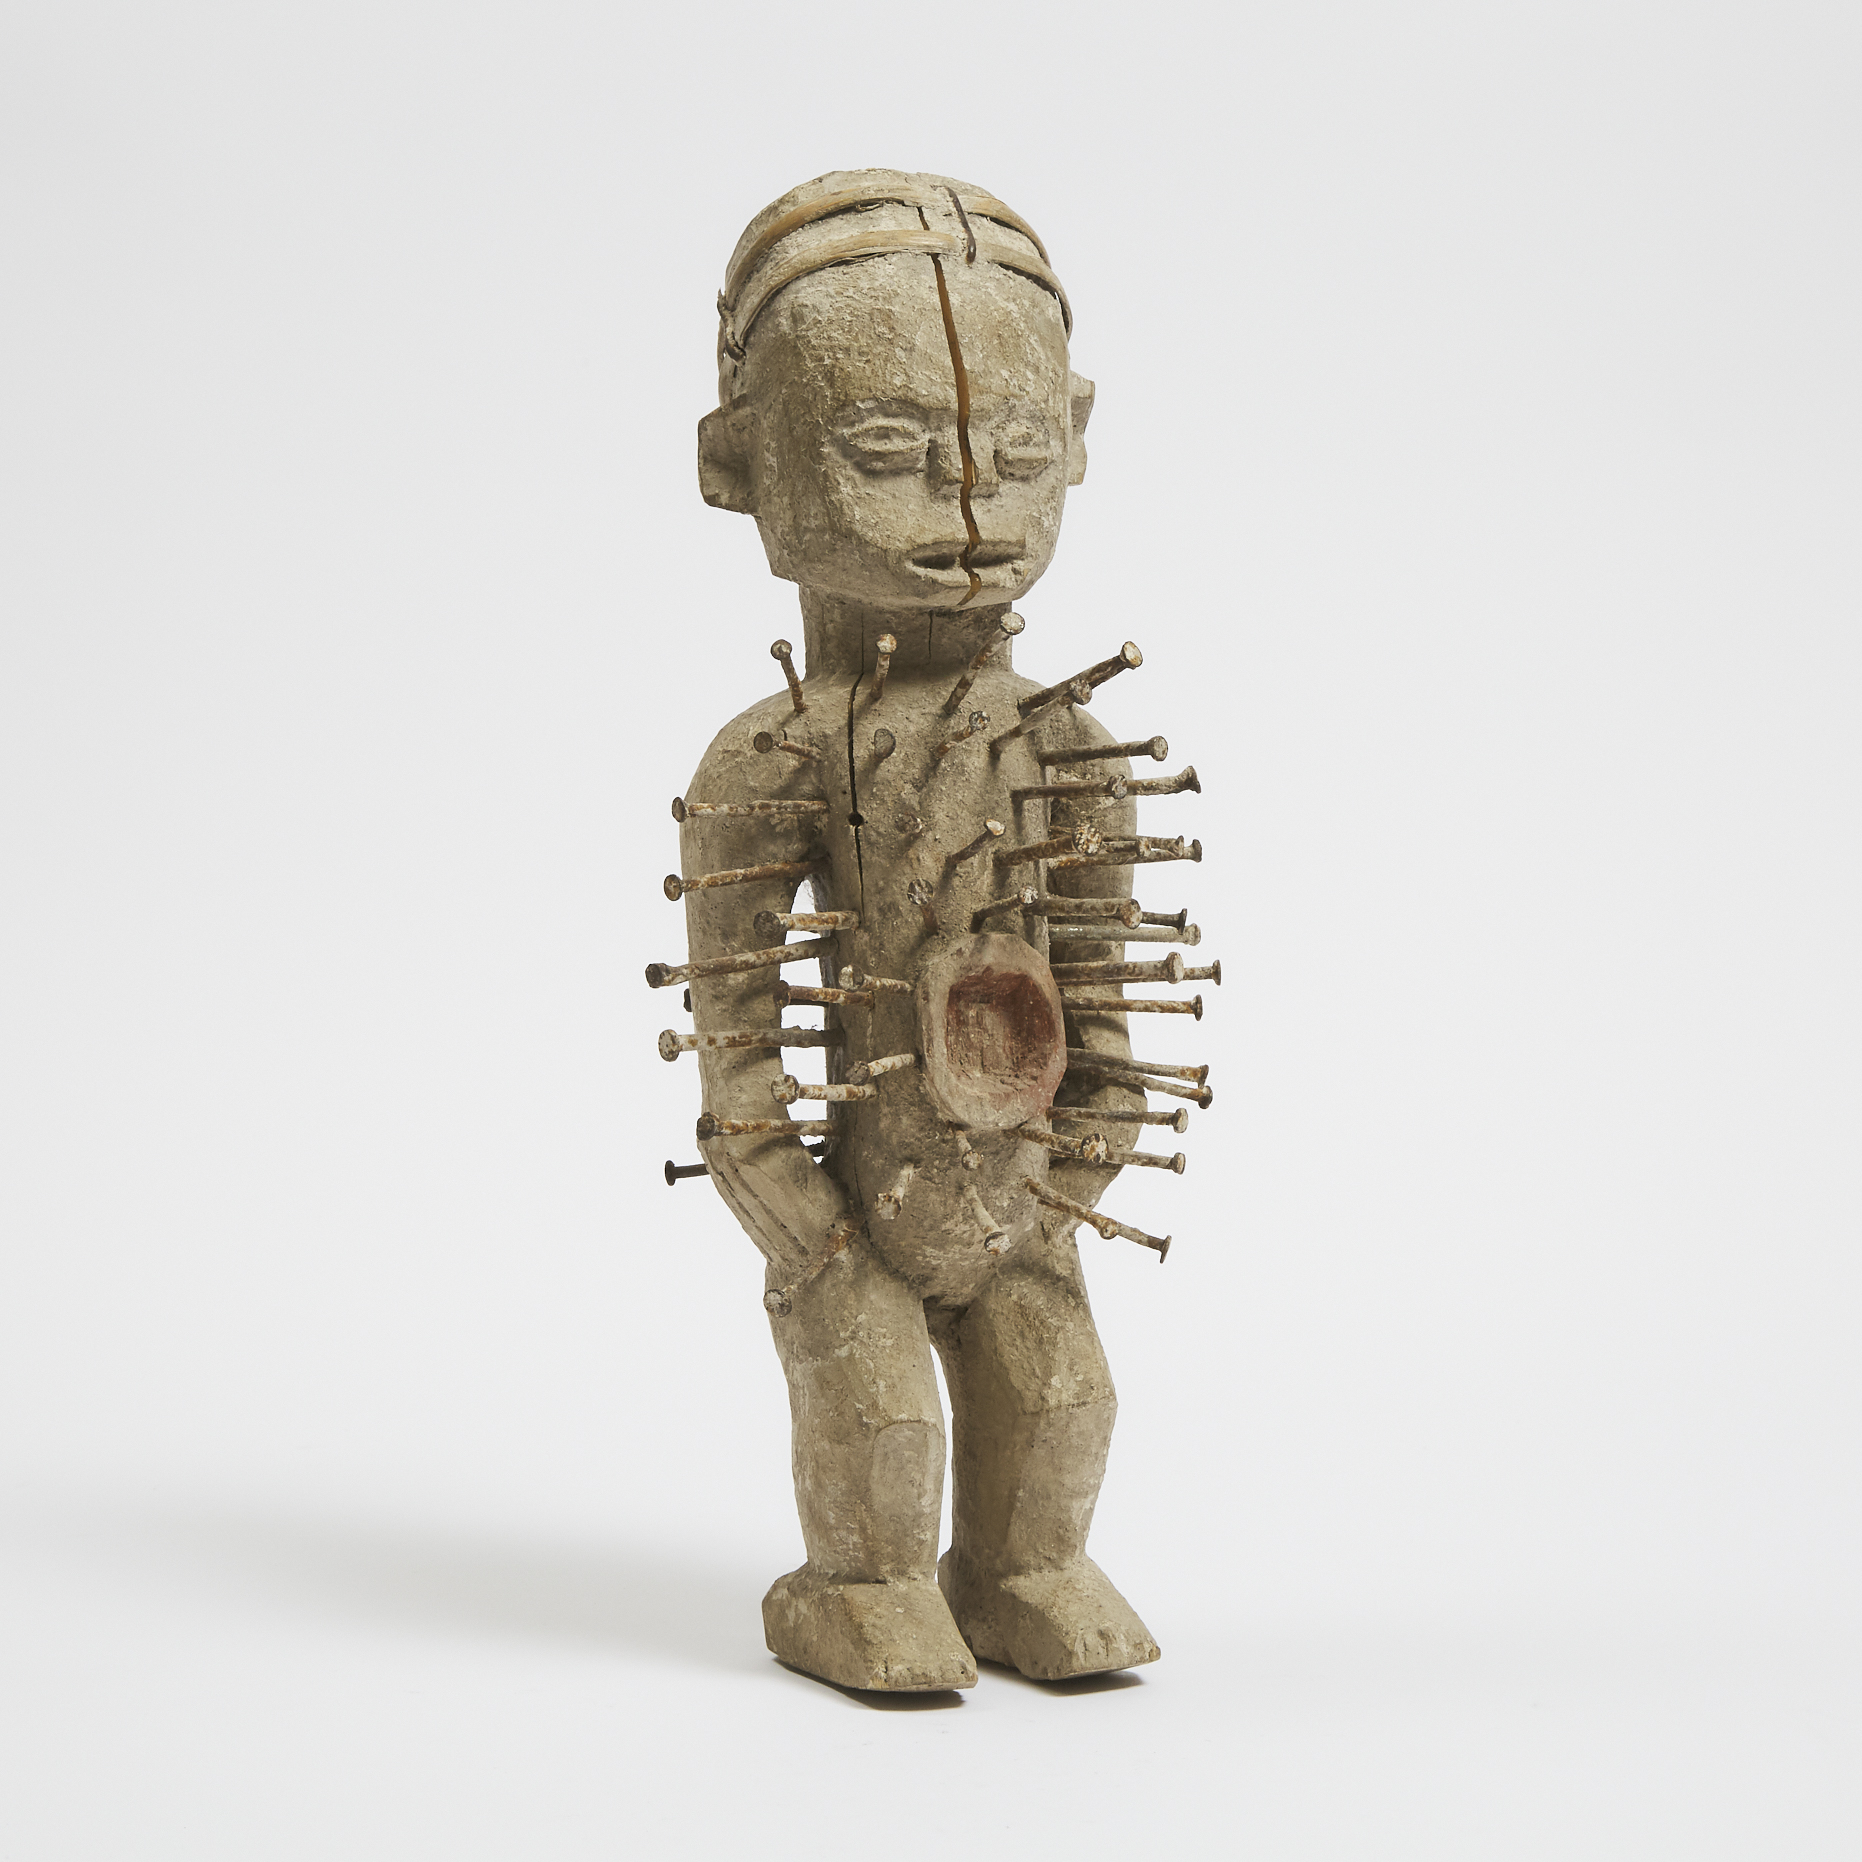 Kongo Power Figure, Democratic Republic of Congo, Central Africa, mid to late 20th century